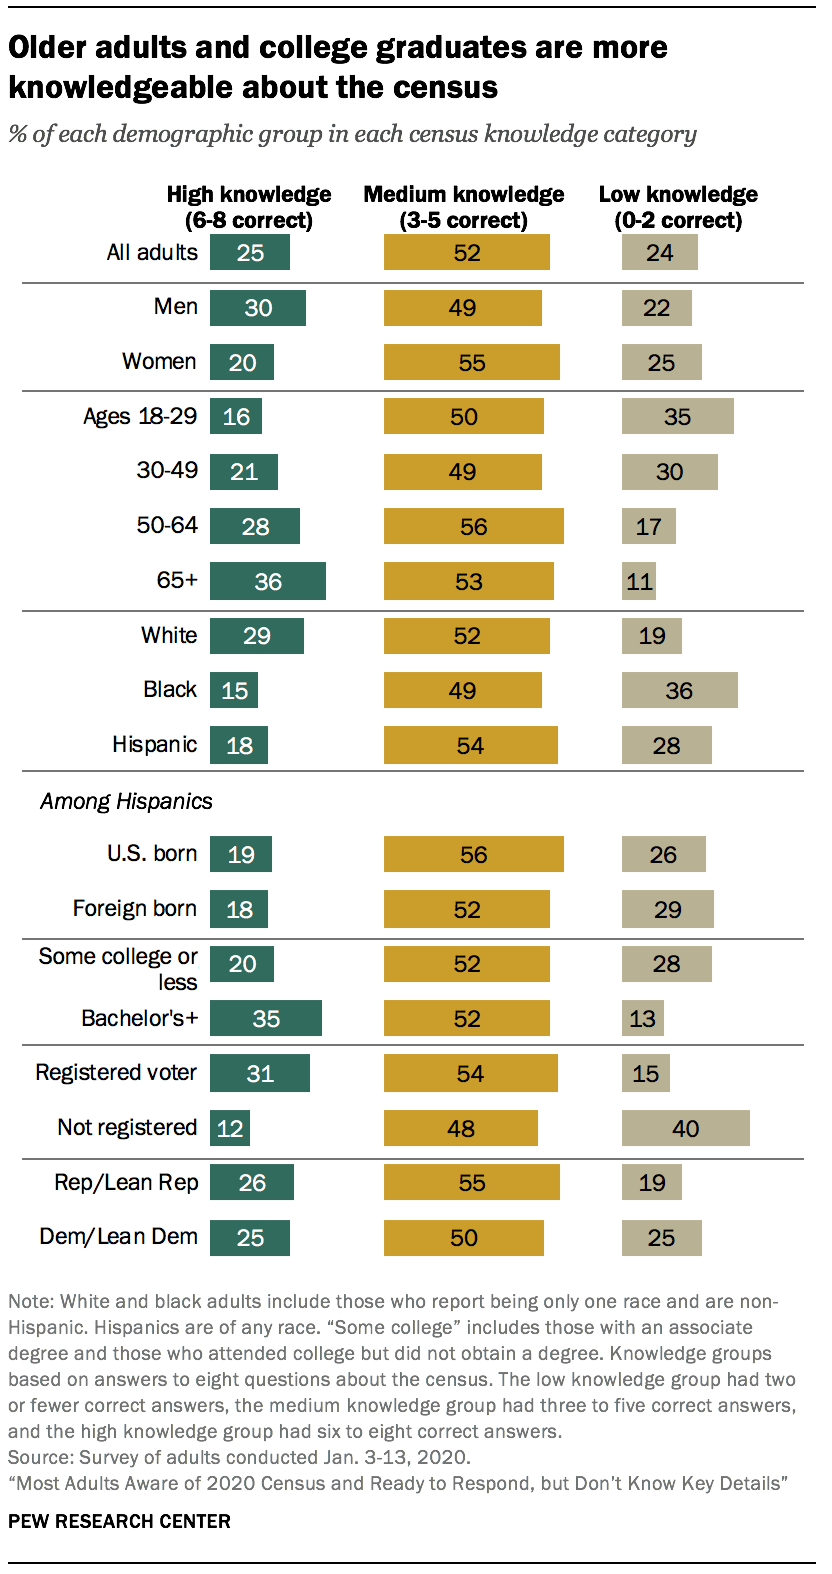 Older adults and college graduates are more knowledgeable about the census